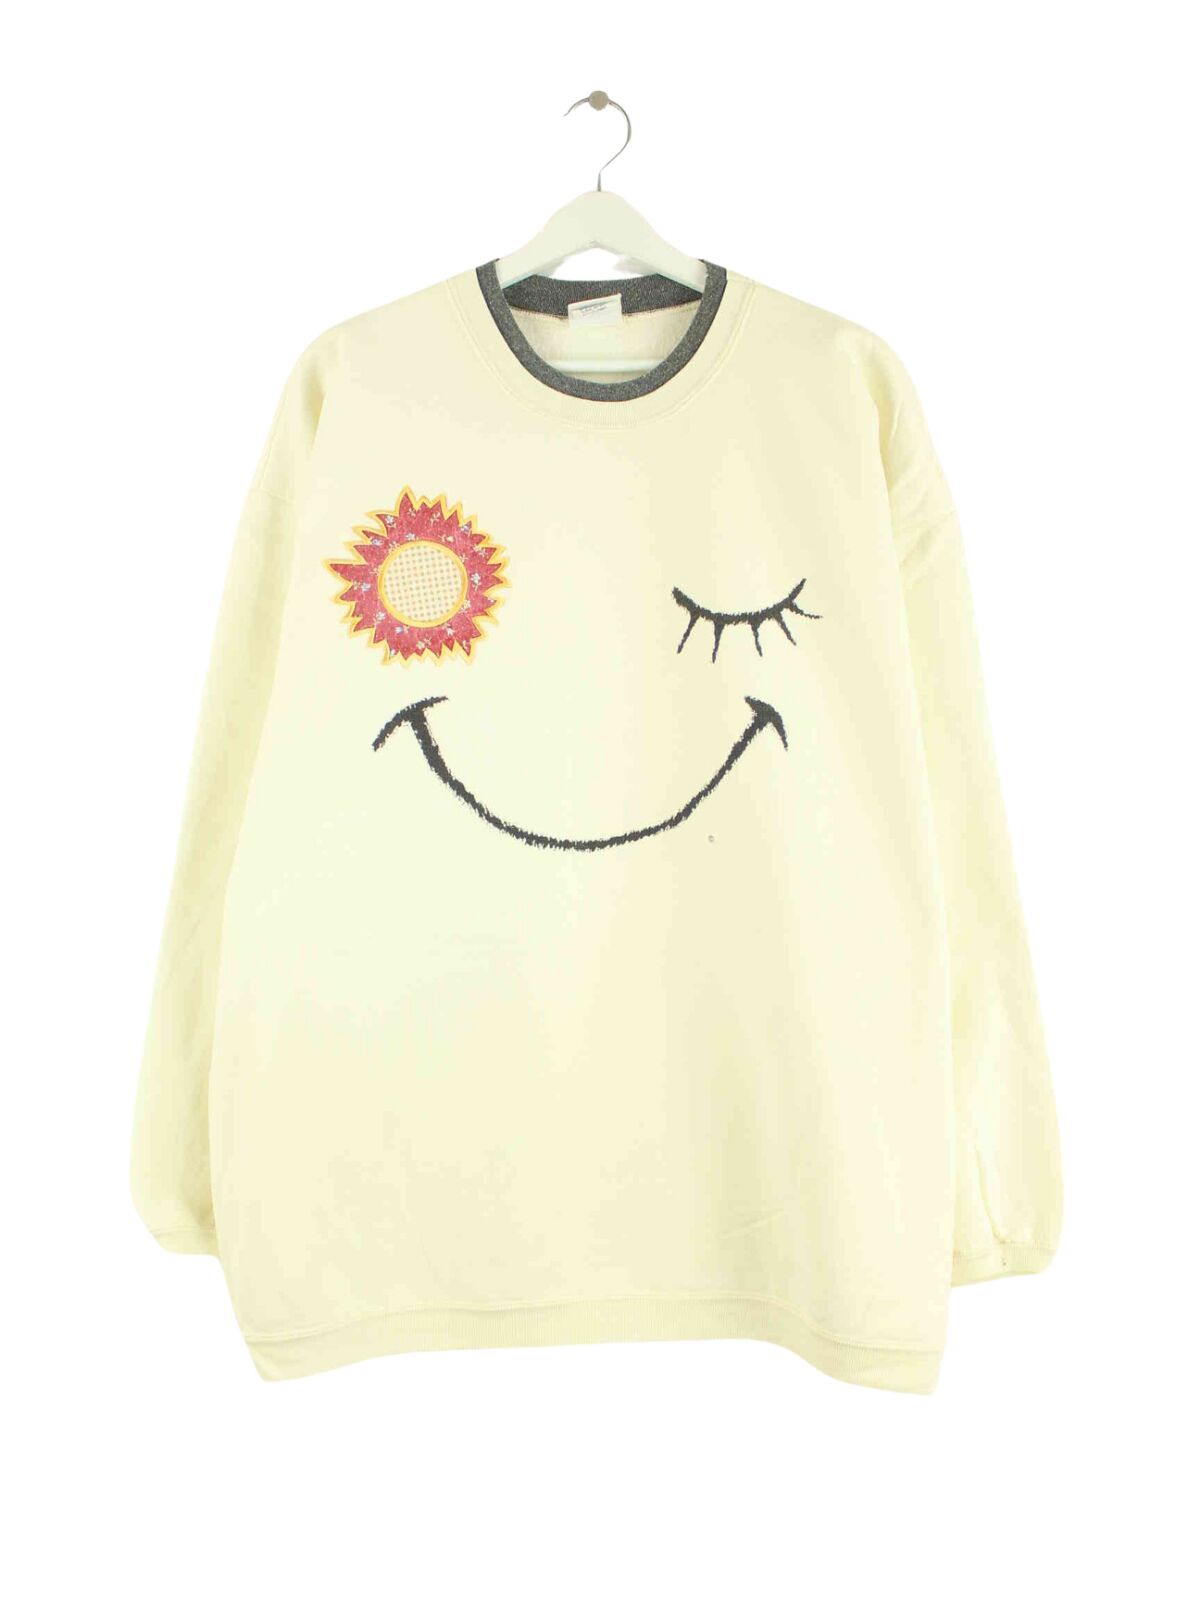 Vintage 80s Embroidered Sun Sweater Beige XL (front image)